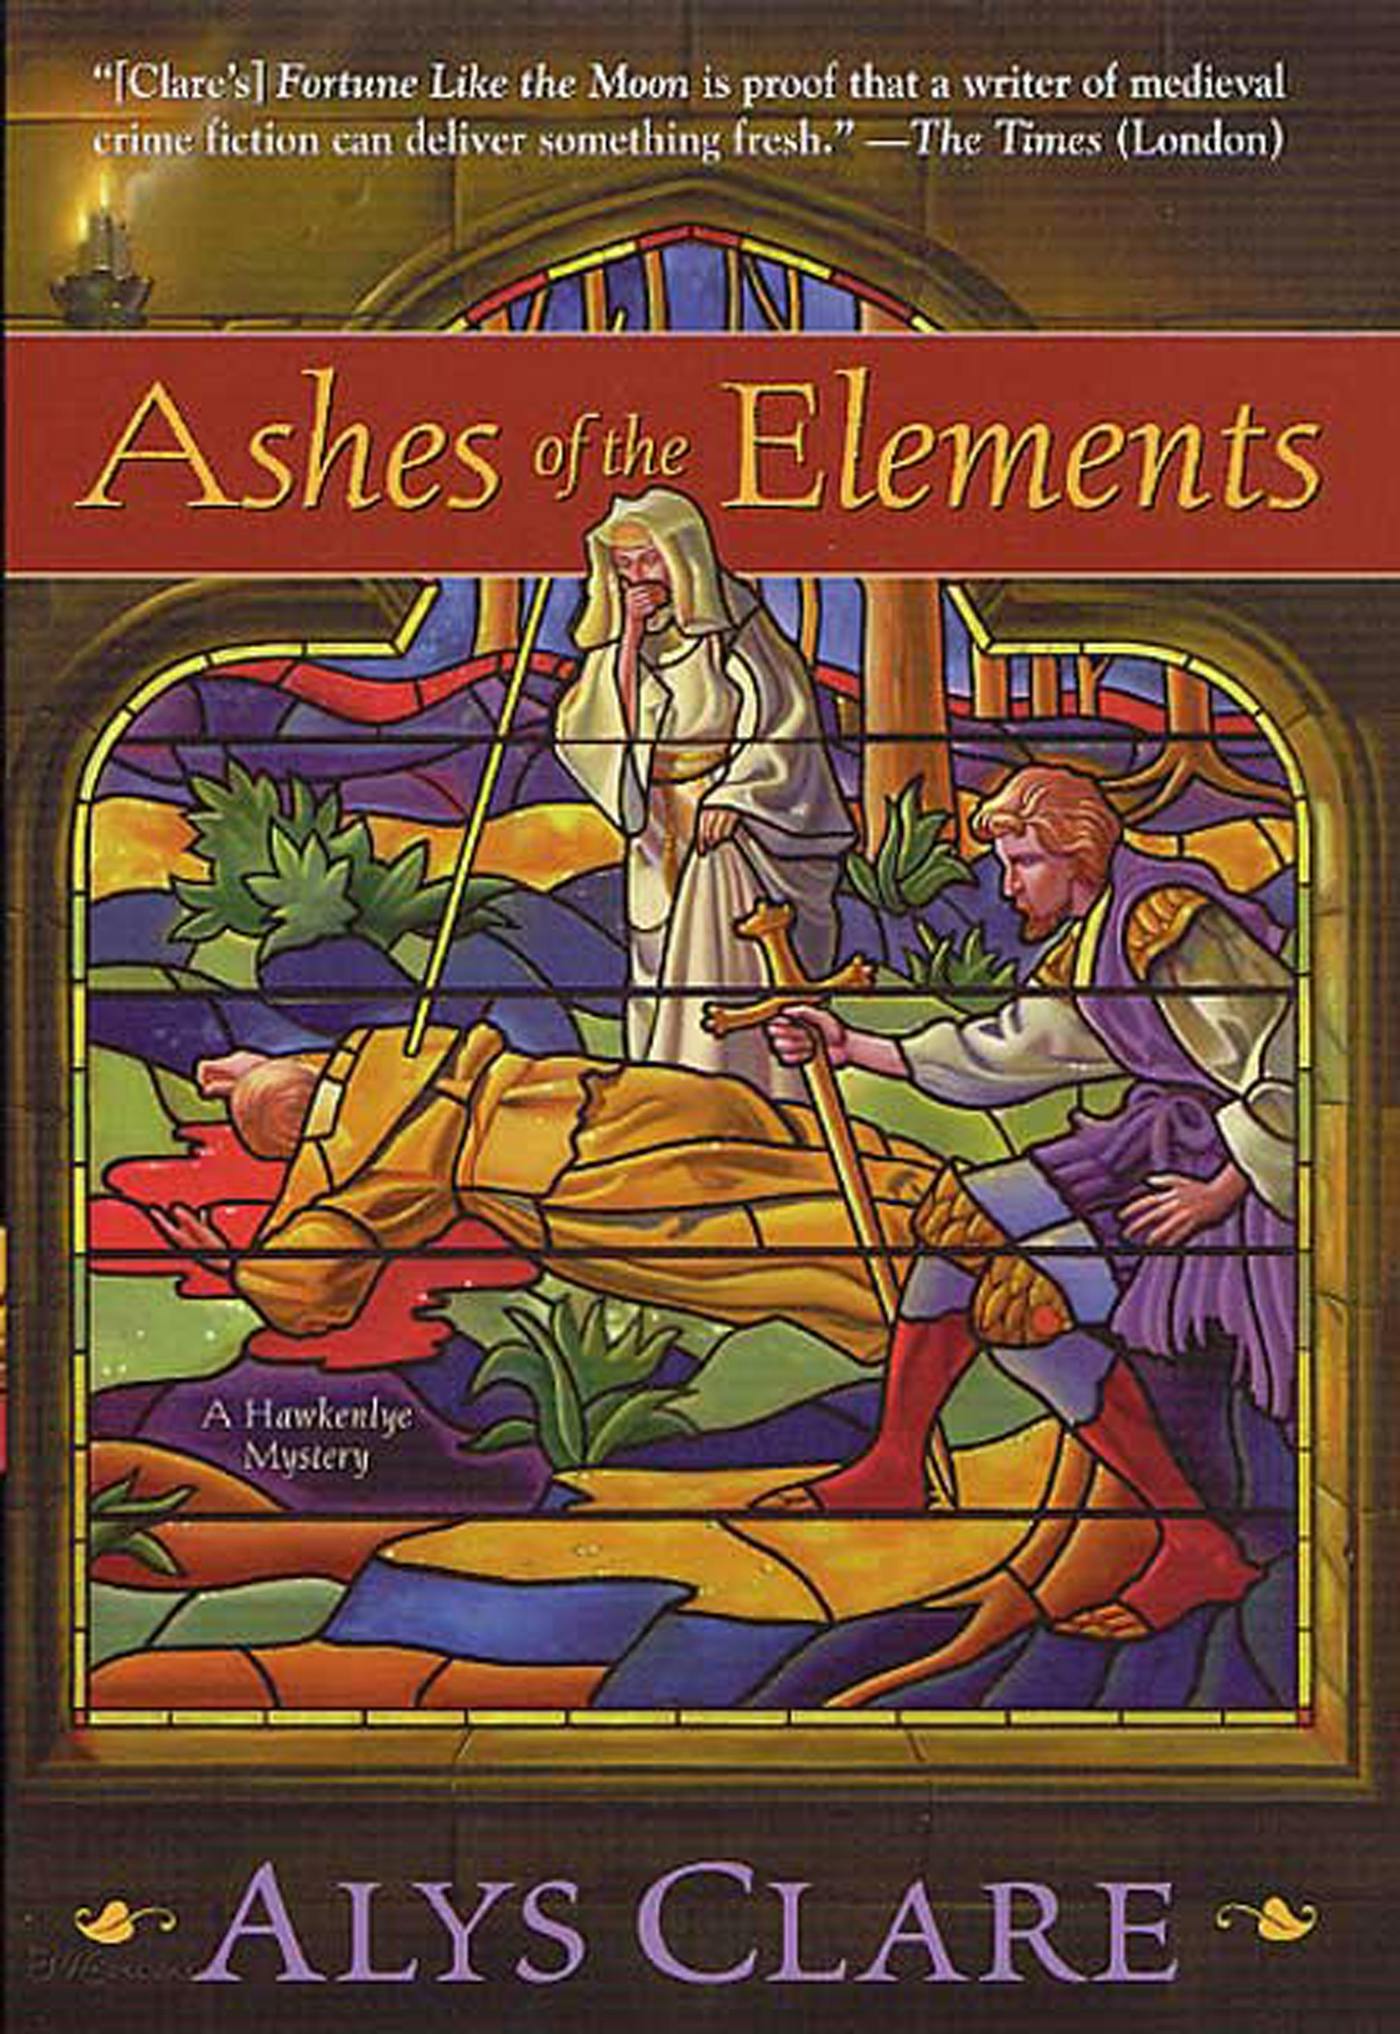 Ashes of the Elements by Alys Clare